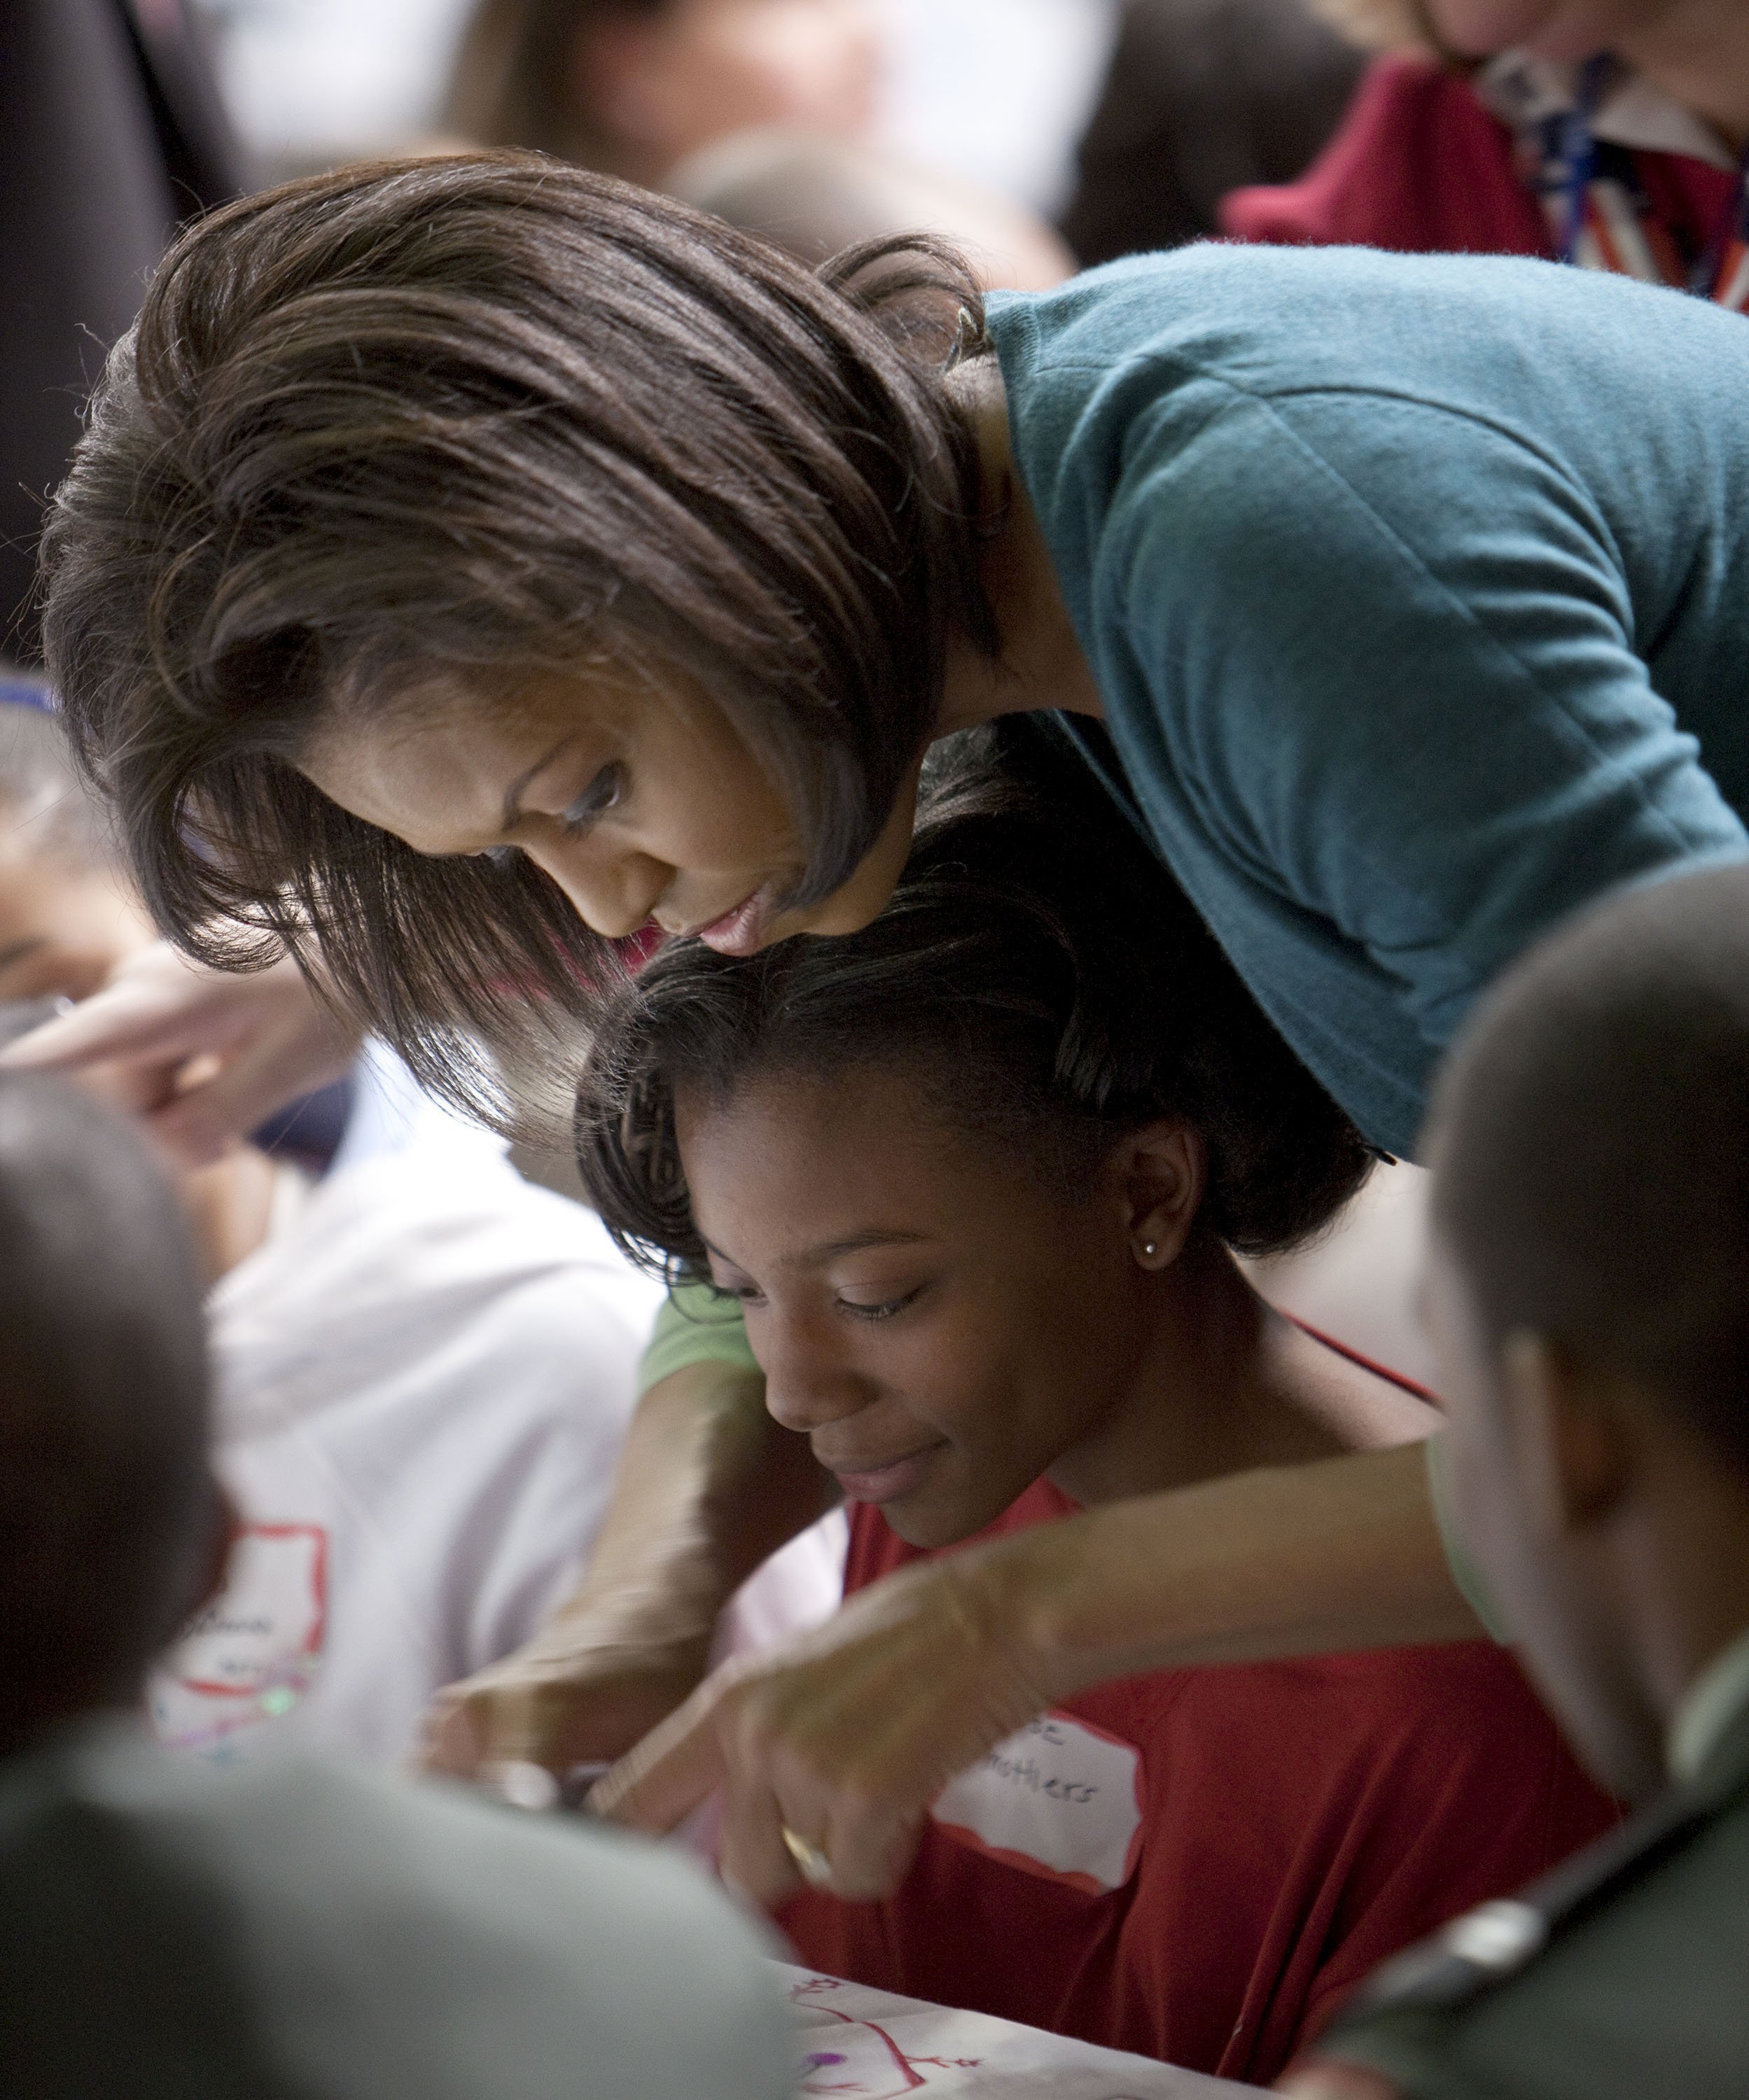 Michelle Obama helps a girl at Calvin Coolidge High School where students, military families, and volunteer service groups are working on various projects supporting the troops on January 19, 2009, in Washington, DC. | Source: Getty Images.